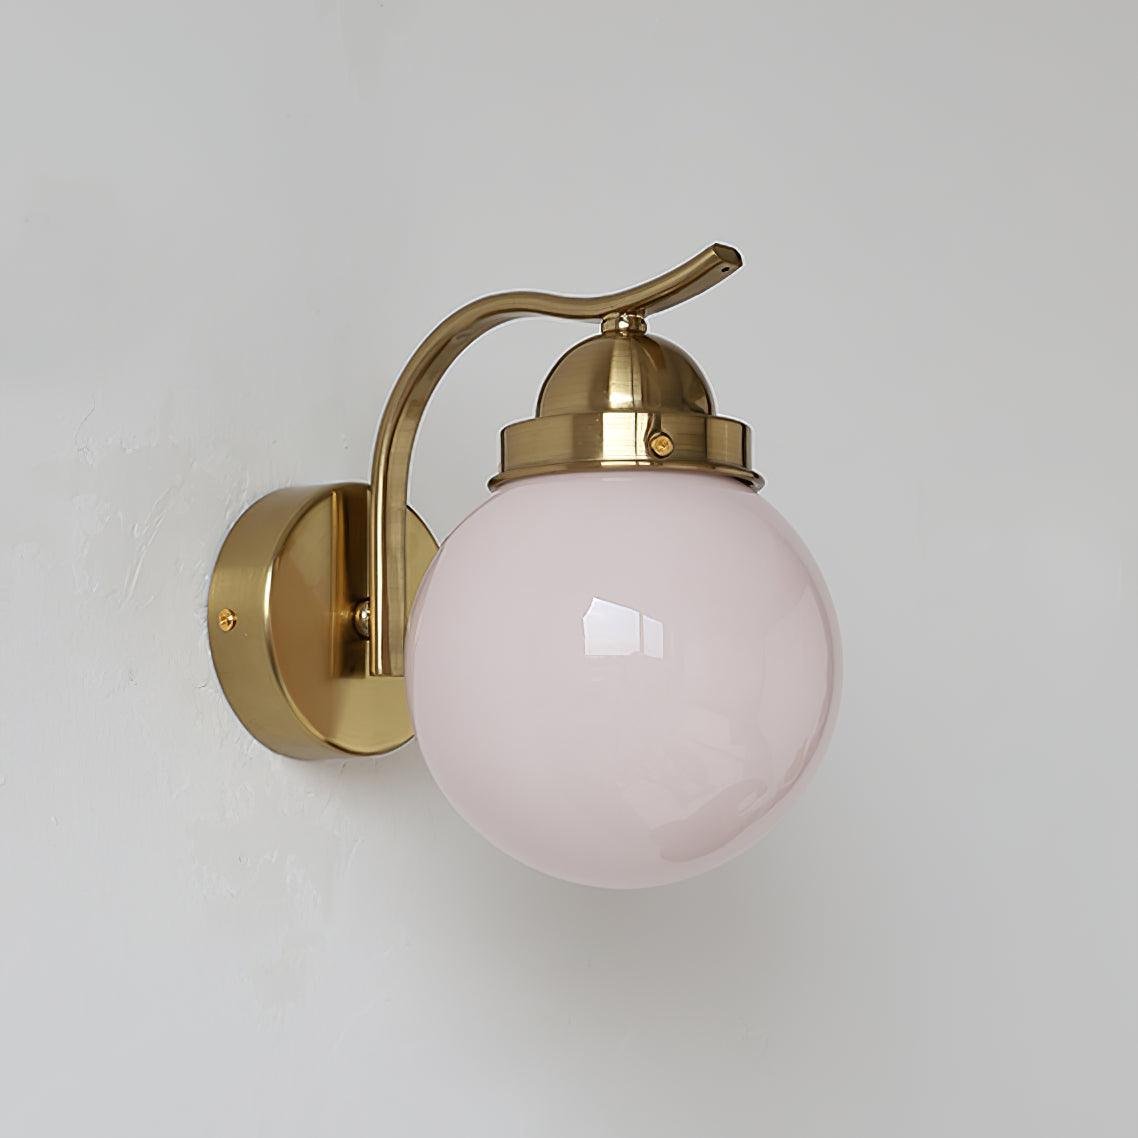 Pair of Ryttenberg Wall Lamps in Copper Plated and Pale Pink